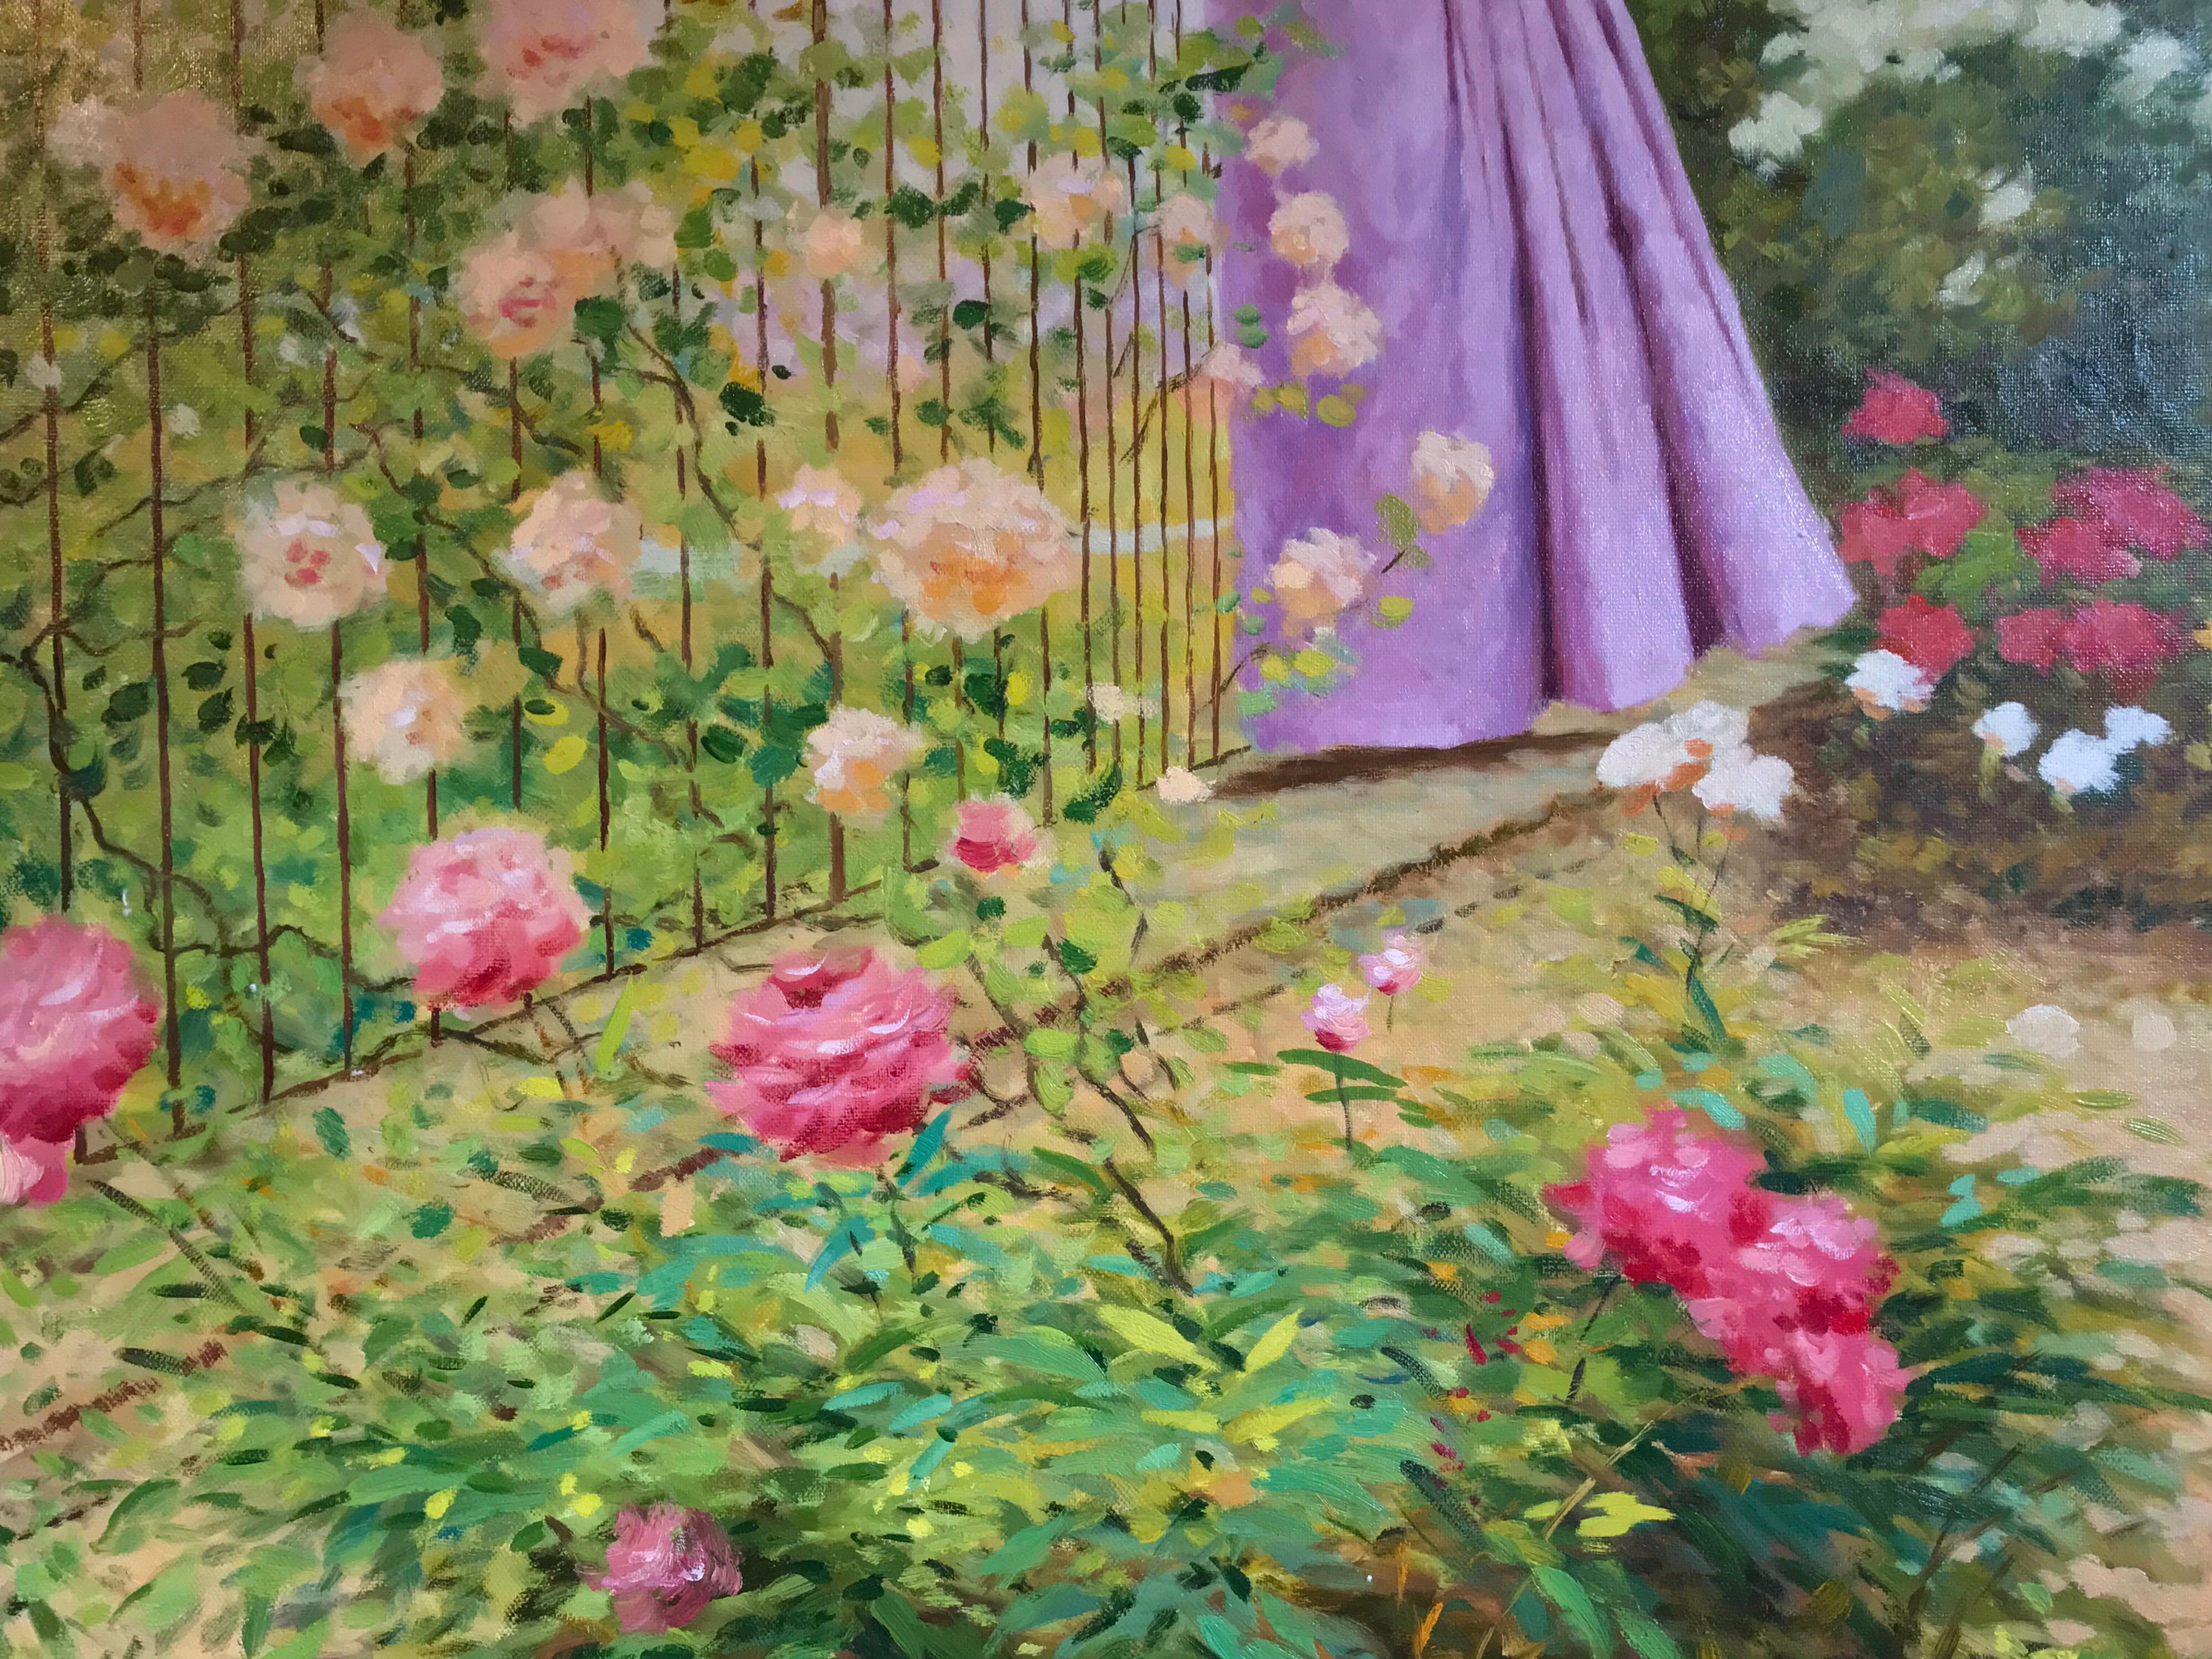 Lady in Floral Garden, Large Oil Painting on Canvas 4